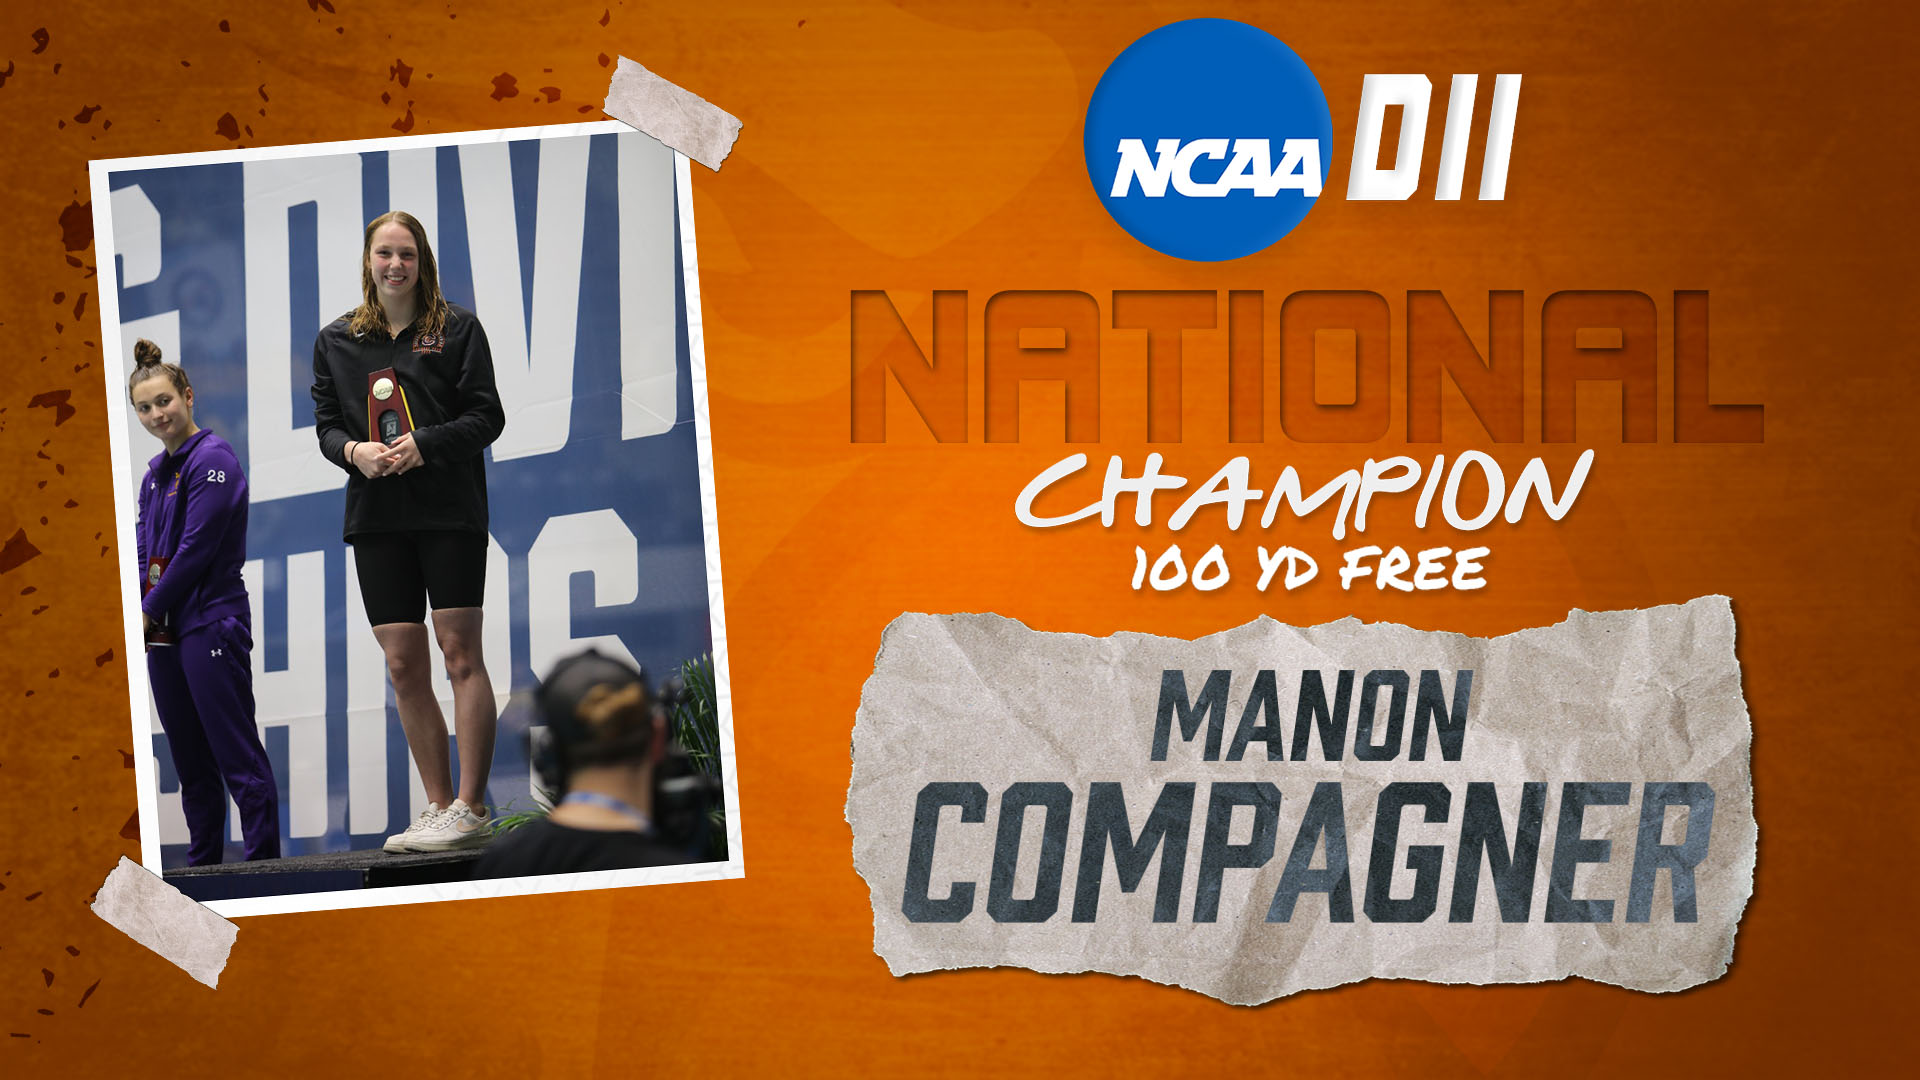 Twice in three days! Manon Compagner grabs her second national championship title